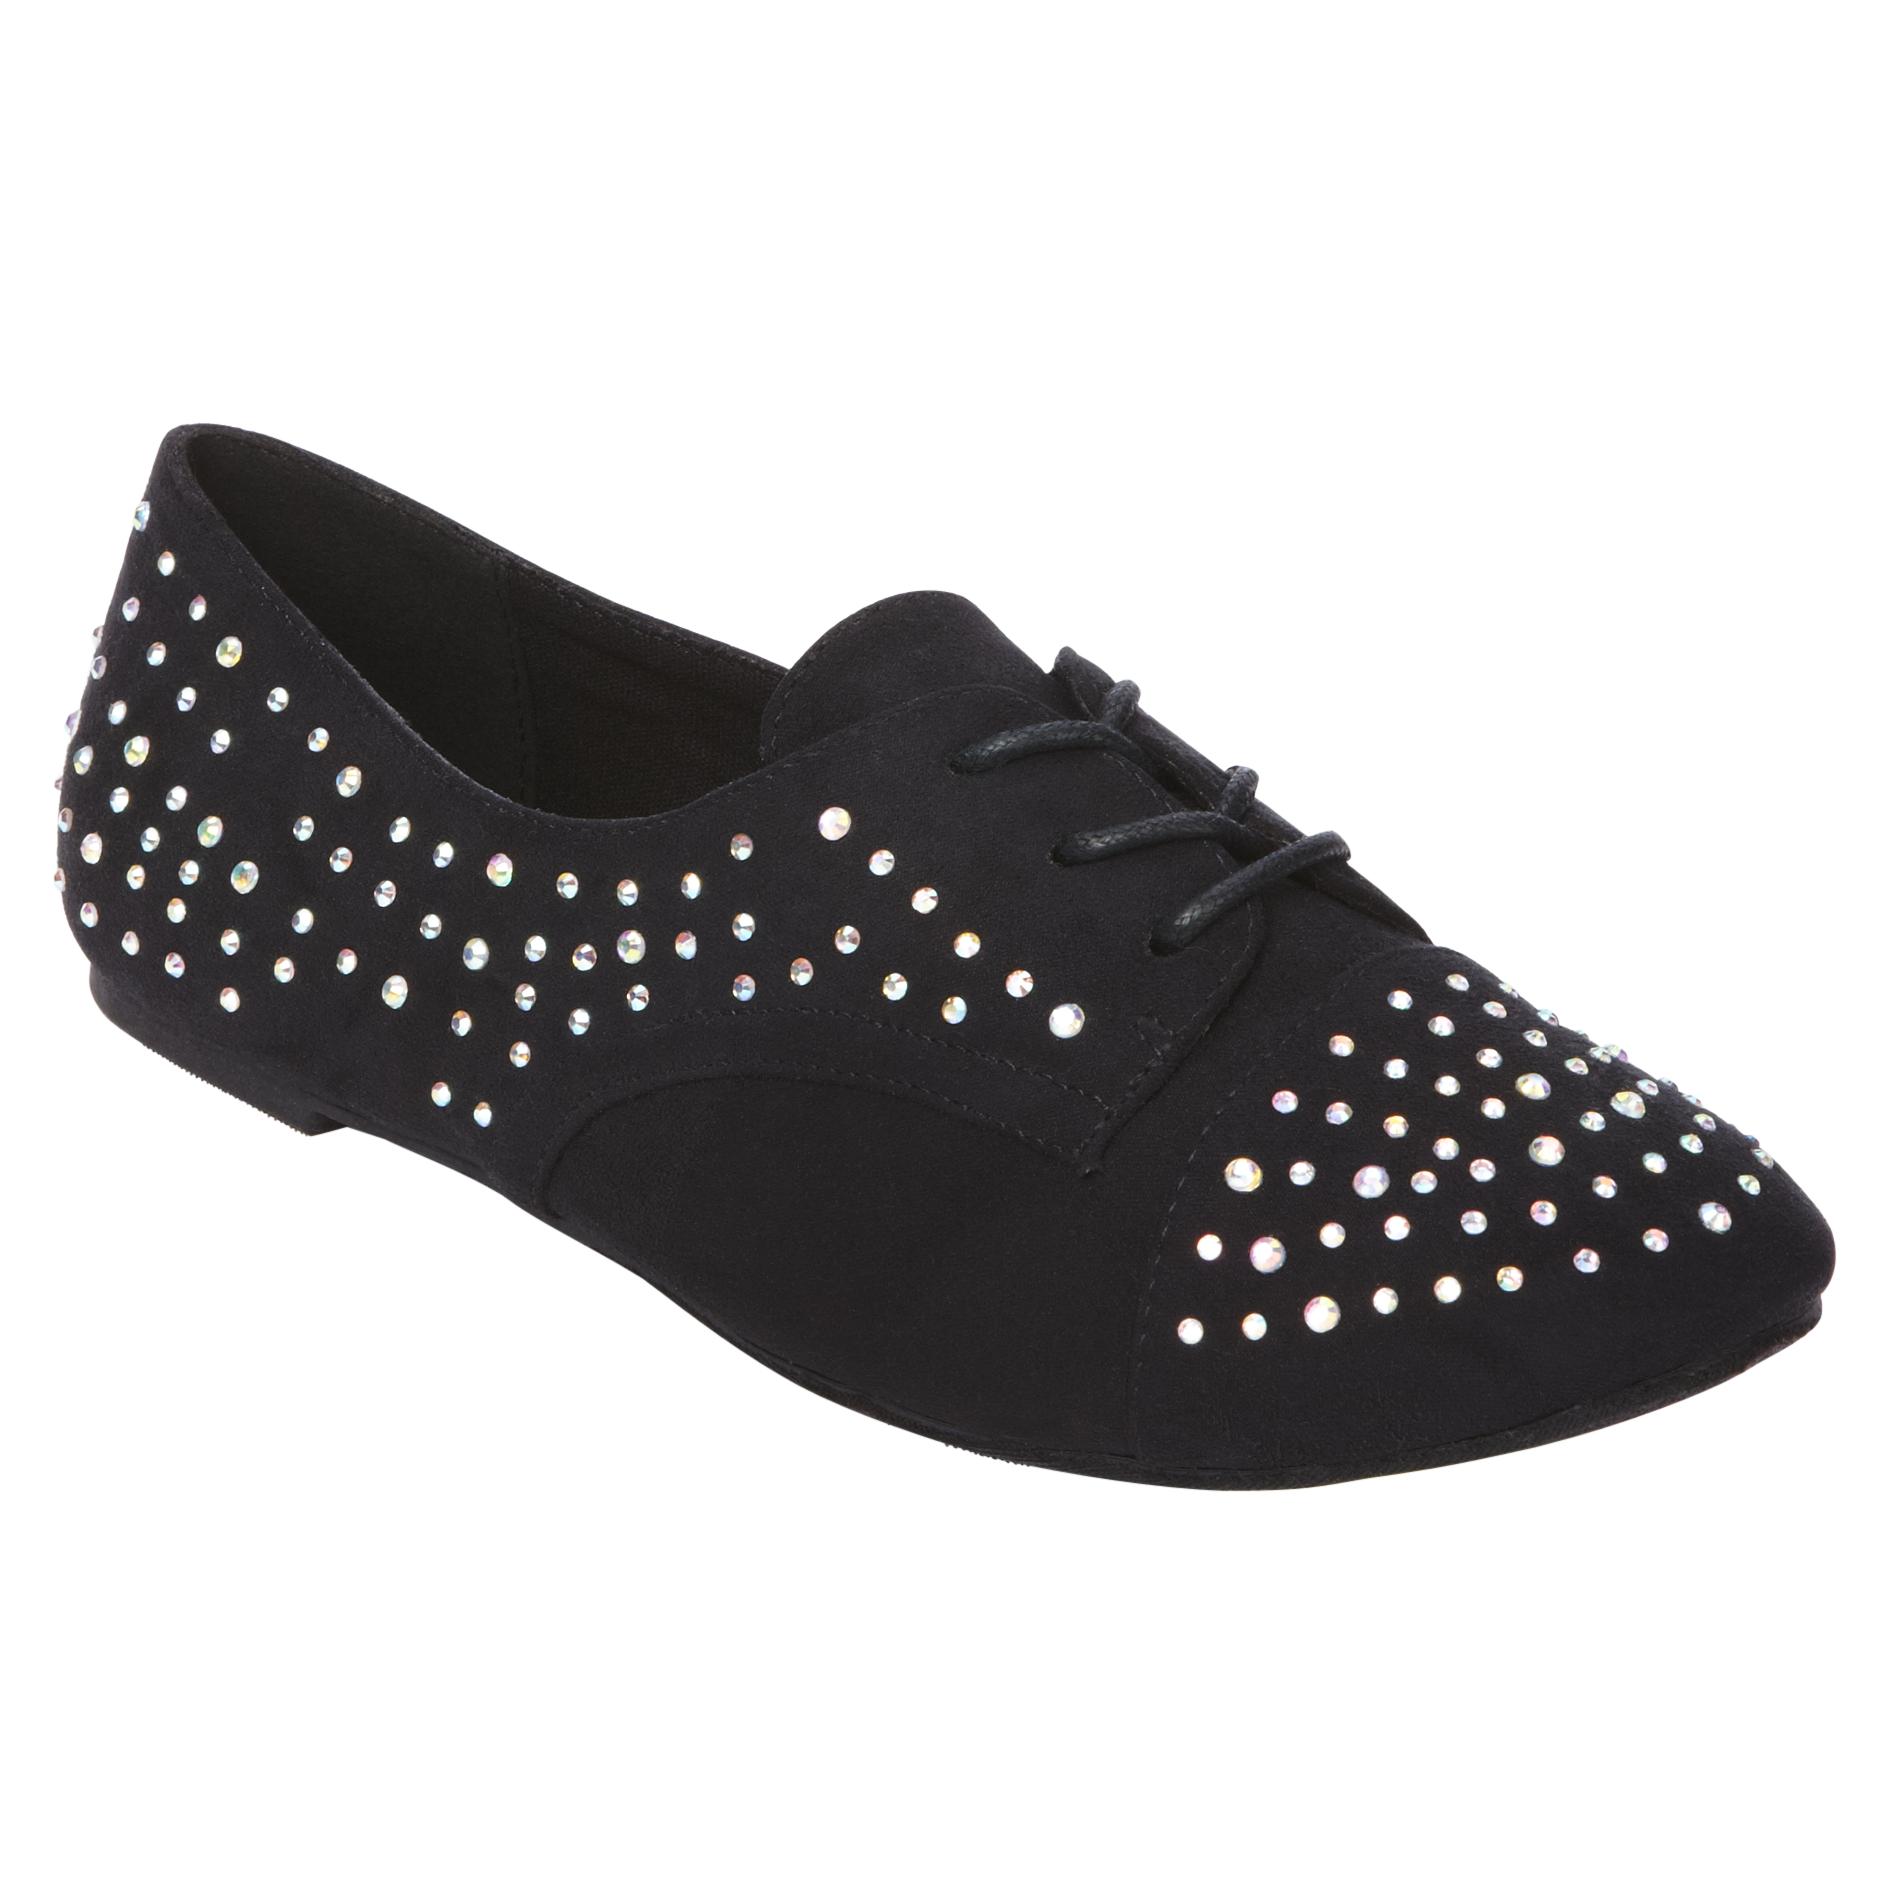 Route 66 Women's Casual Flat Candy - Black